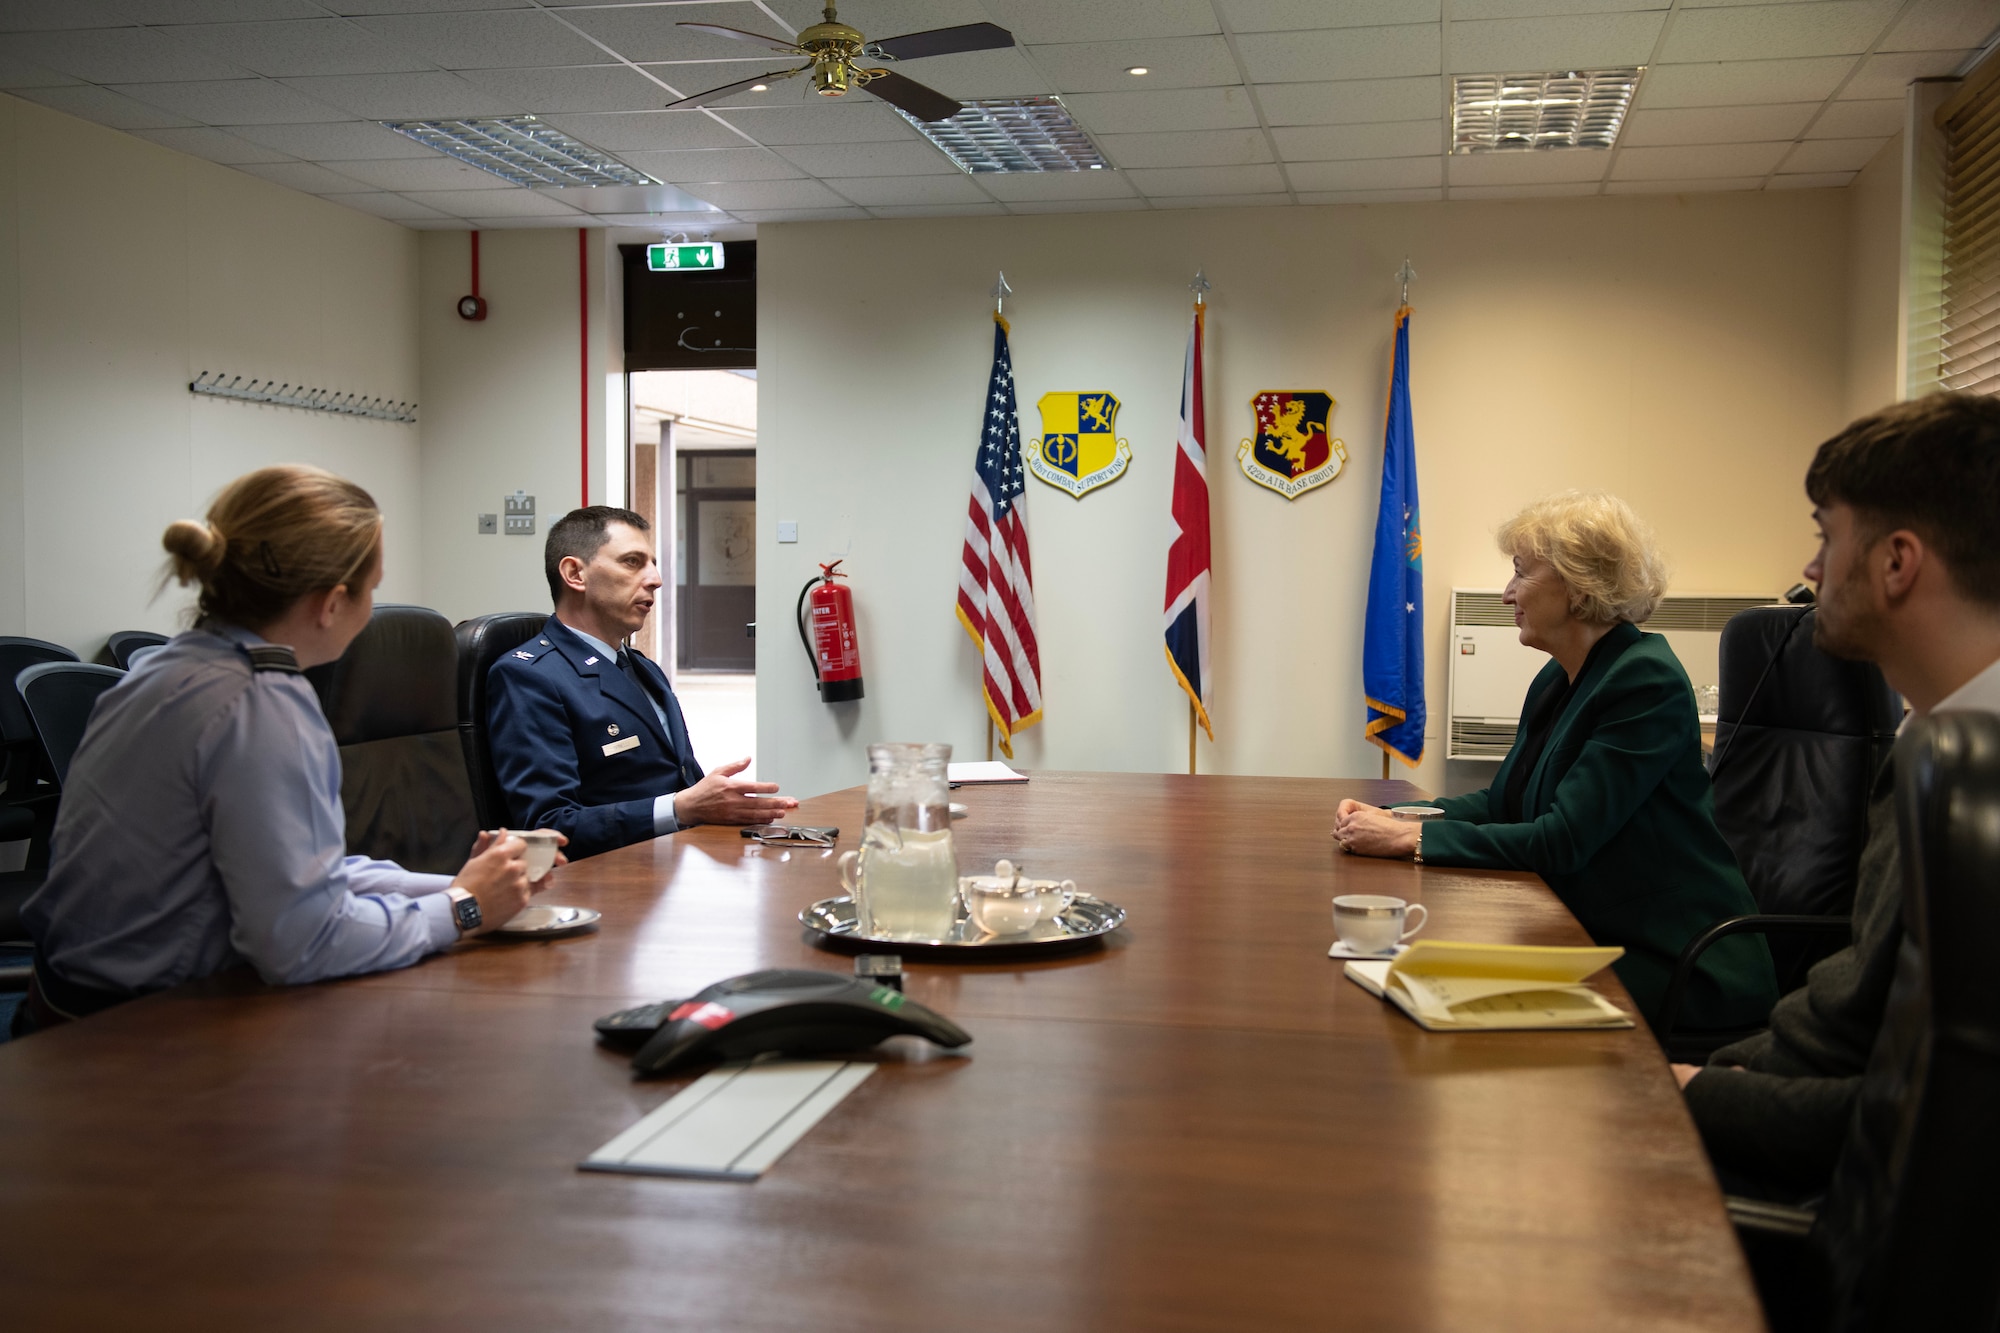 U.S. Air Force Col. Edward Spinelli, right, 422d Air Base Group commander, and Royal Air Force Sqn. Ldr. Tina Sheeran, RAF Alconbury/Croughton/Molesworth RAF commander, met Rt Hon. Dame Andrea Leadsom DBE MP, left, at RAF Croughton, England, April 27, 2023, to discuss topics of interest for the base and local communities. During the meeting they reiterated the close ties between the base and the local community and talked about schooling for the base children, housing in the local area, on base employment for U.K. nationals, and different ways the base can improve security while being as green as possible. (U.S. Air Force photo by Staff Sgt. Jennifer Zima)